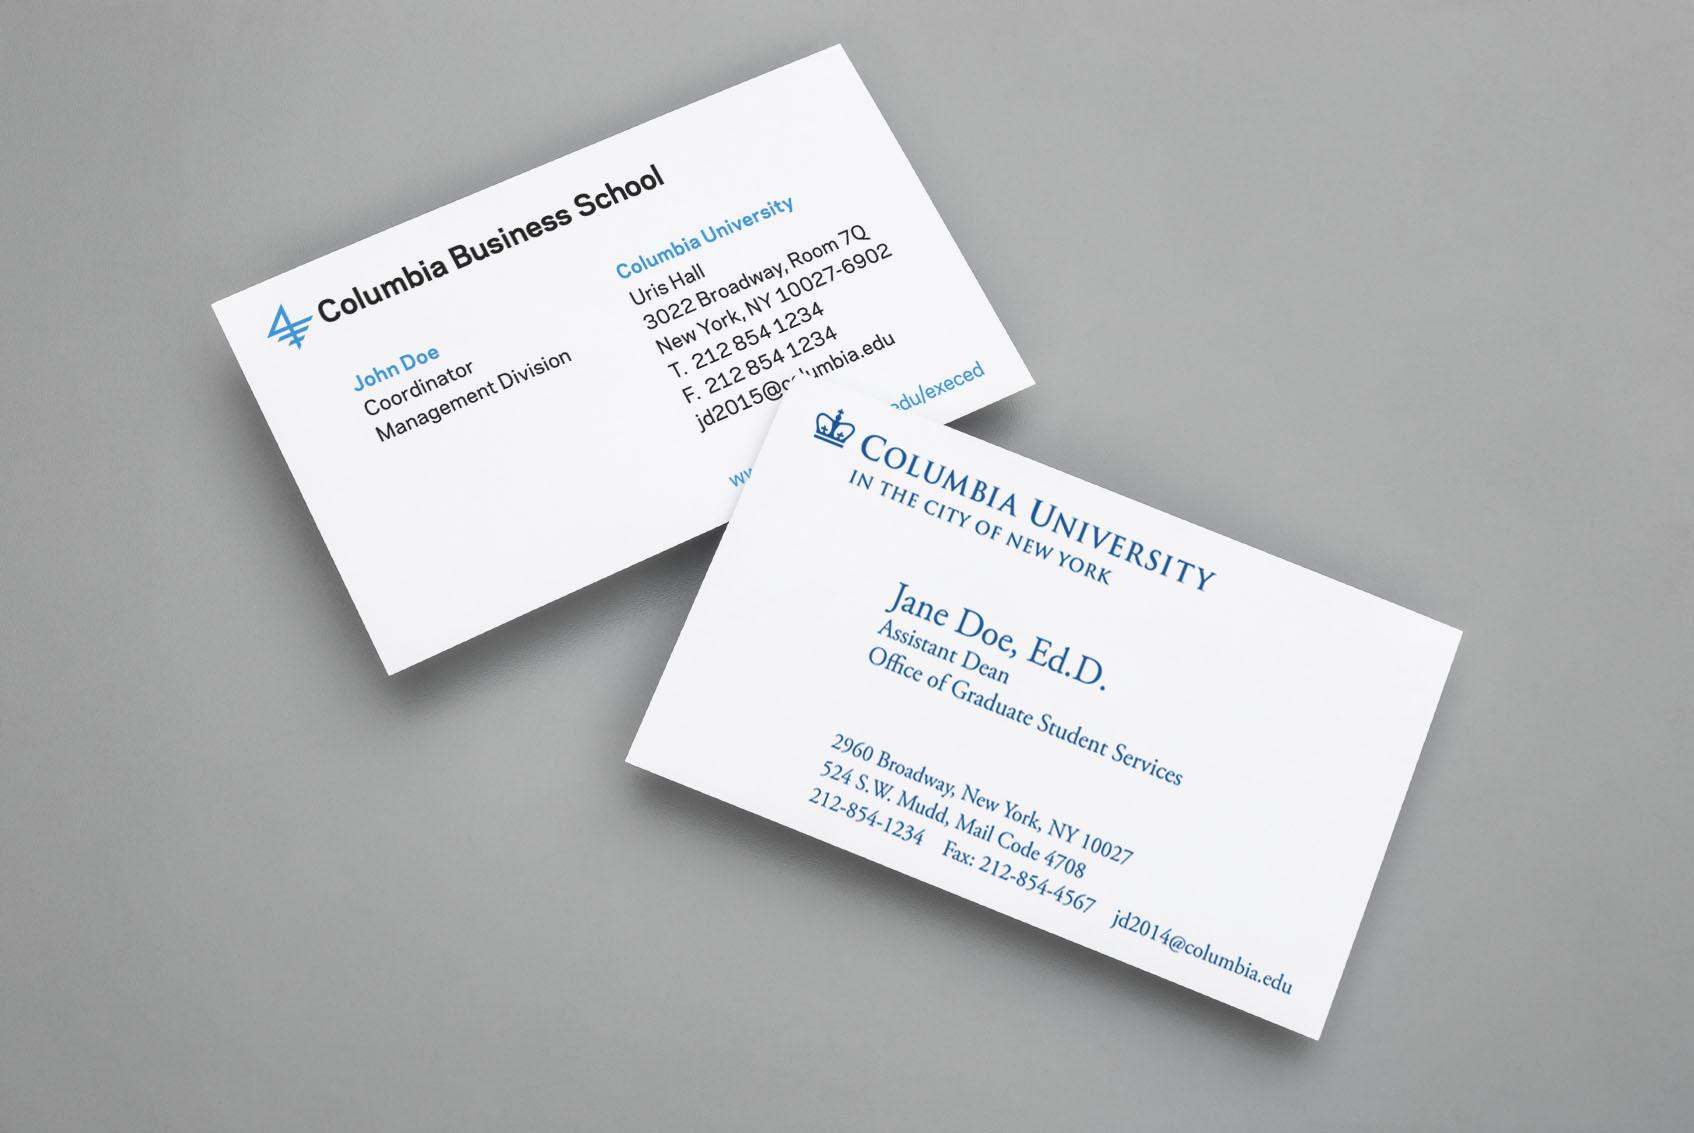 Business card samples